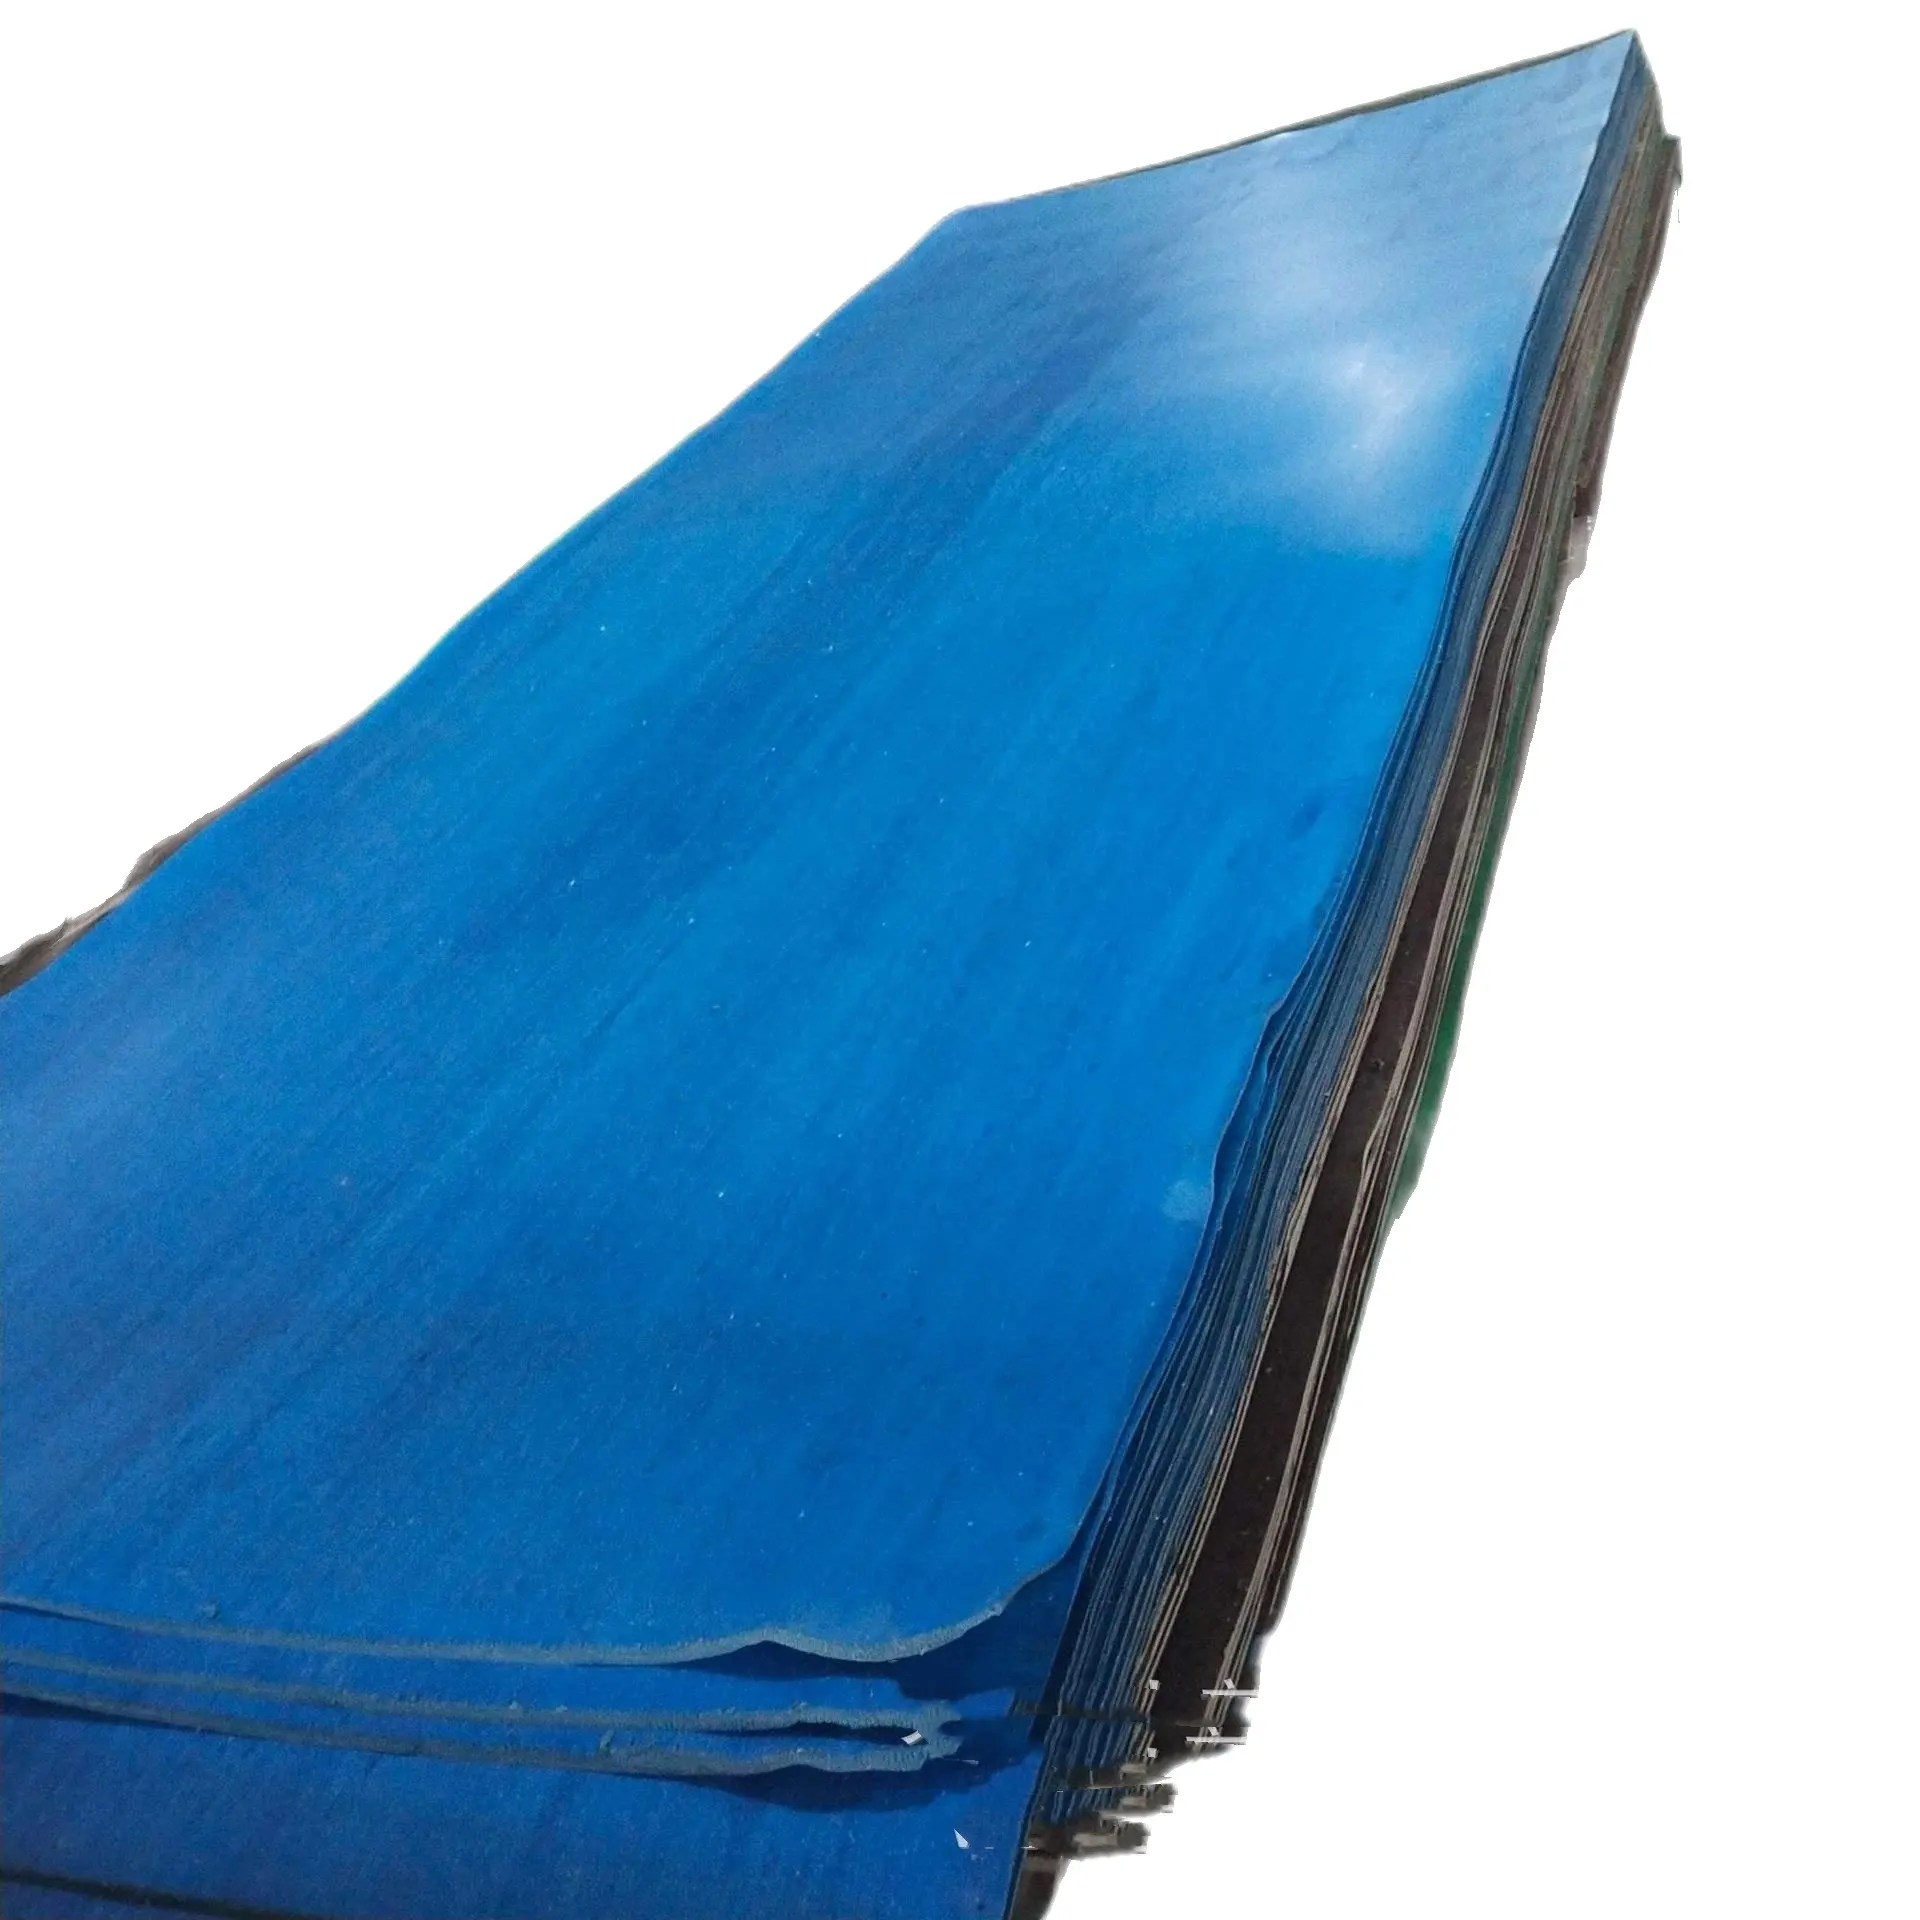 Non asbestos compressed fiber rubber sheet gasket oil resistant high temperature and high pressure sealing material